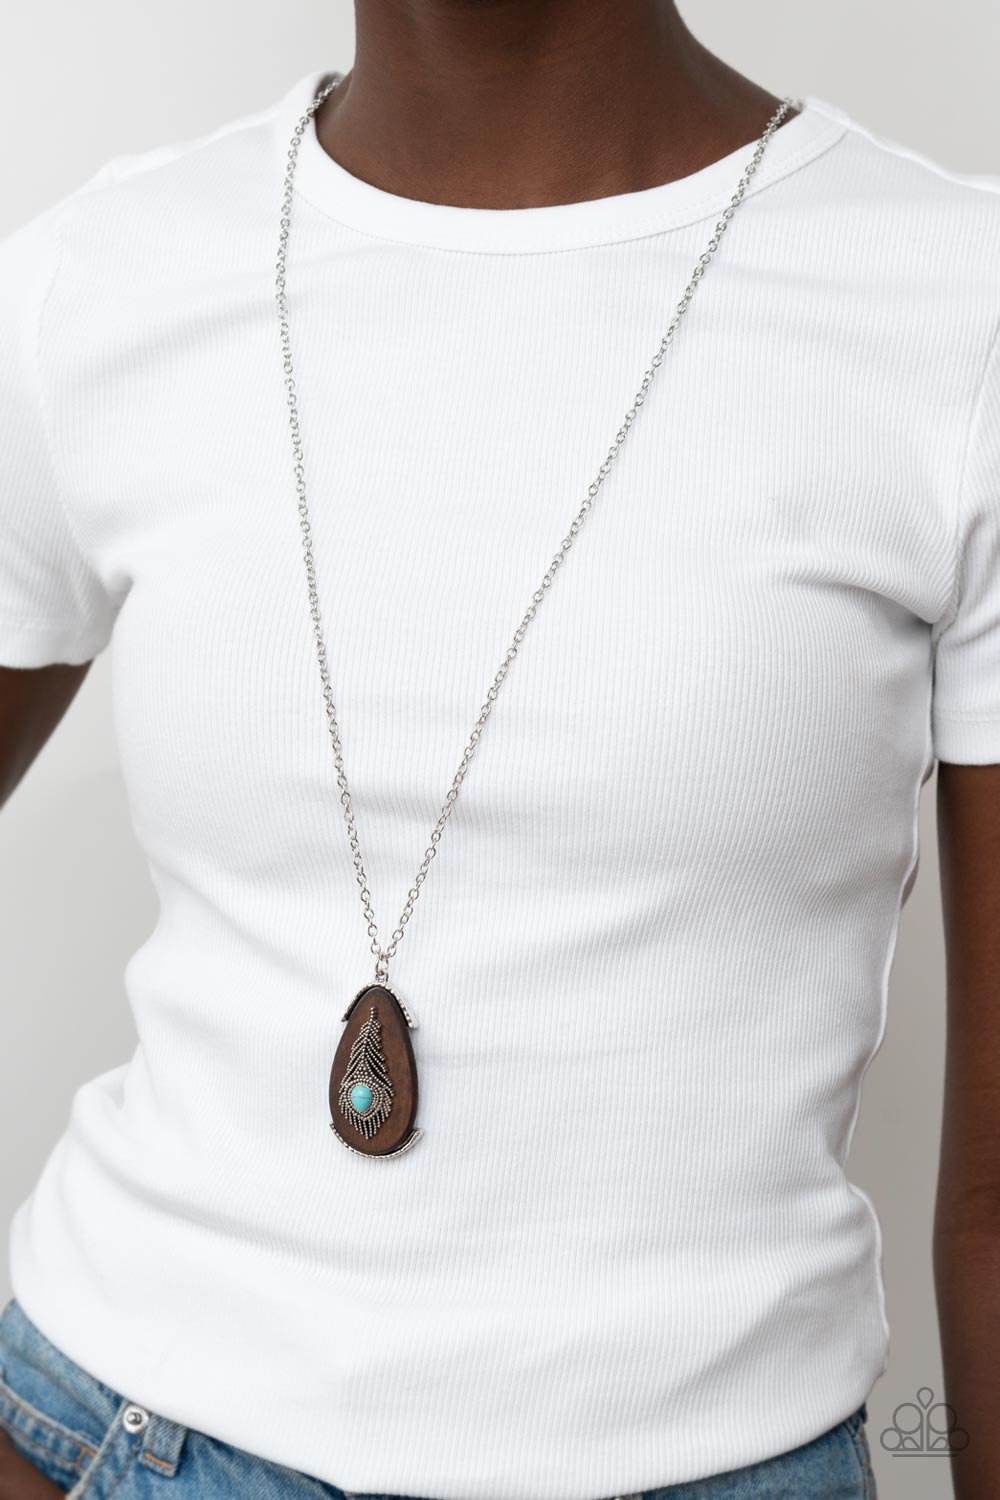 Personal FOWL Necklace - Blue